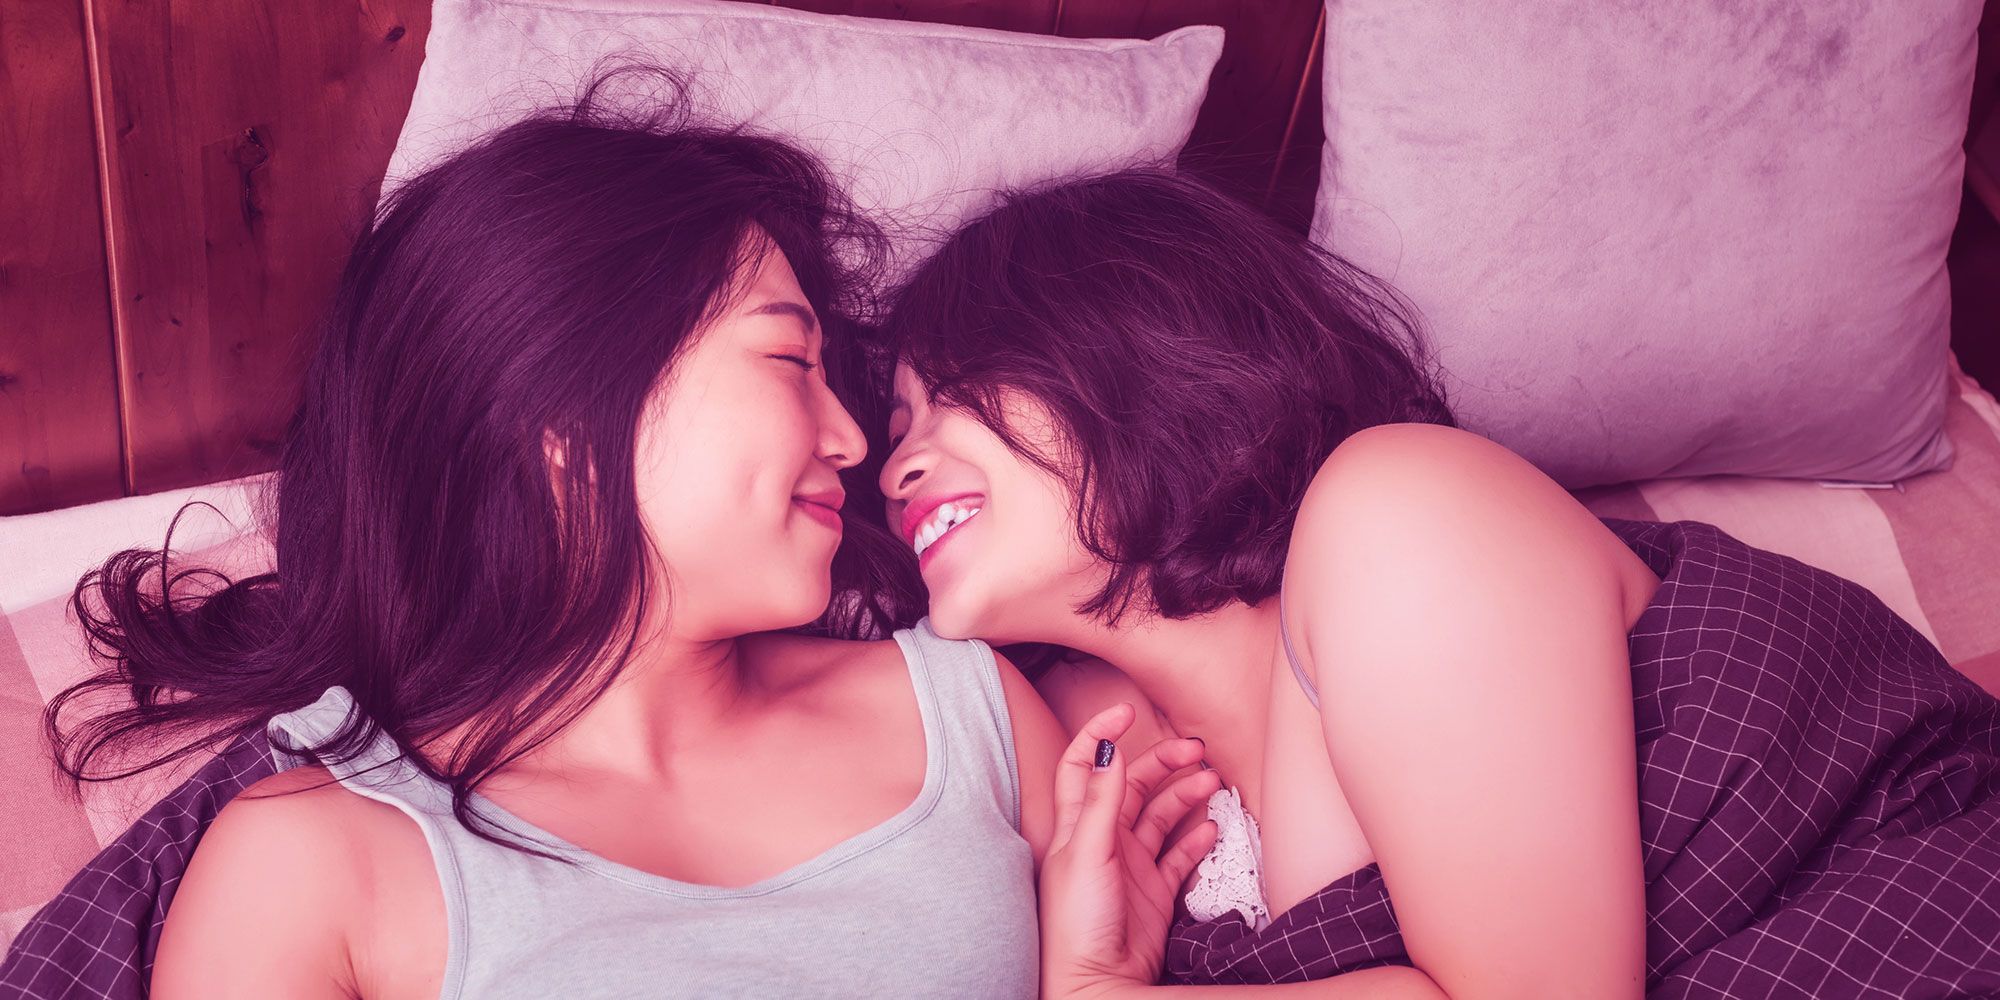 14 queer women on what they find most attractive in a partner